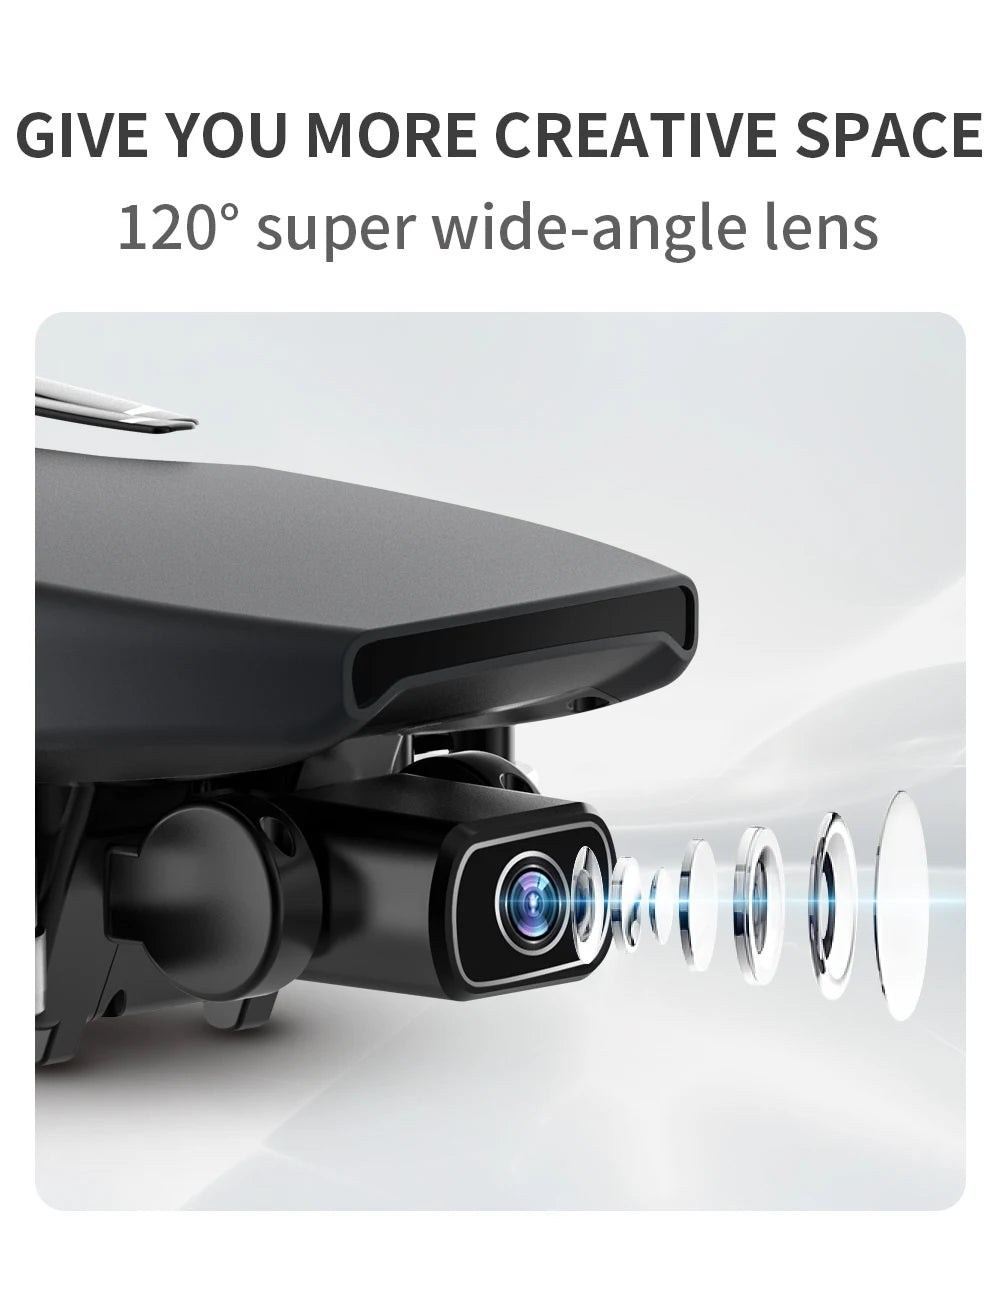 G108 Pro MAx Drone, GIVE YOU MORE CREATIVE SPACE 1209 super wide-angle lens 